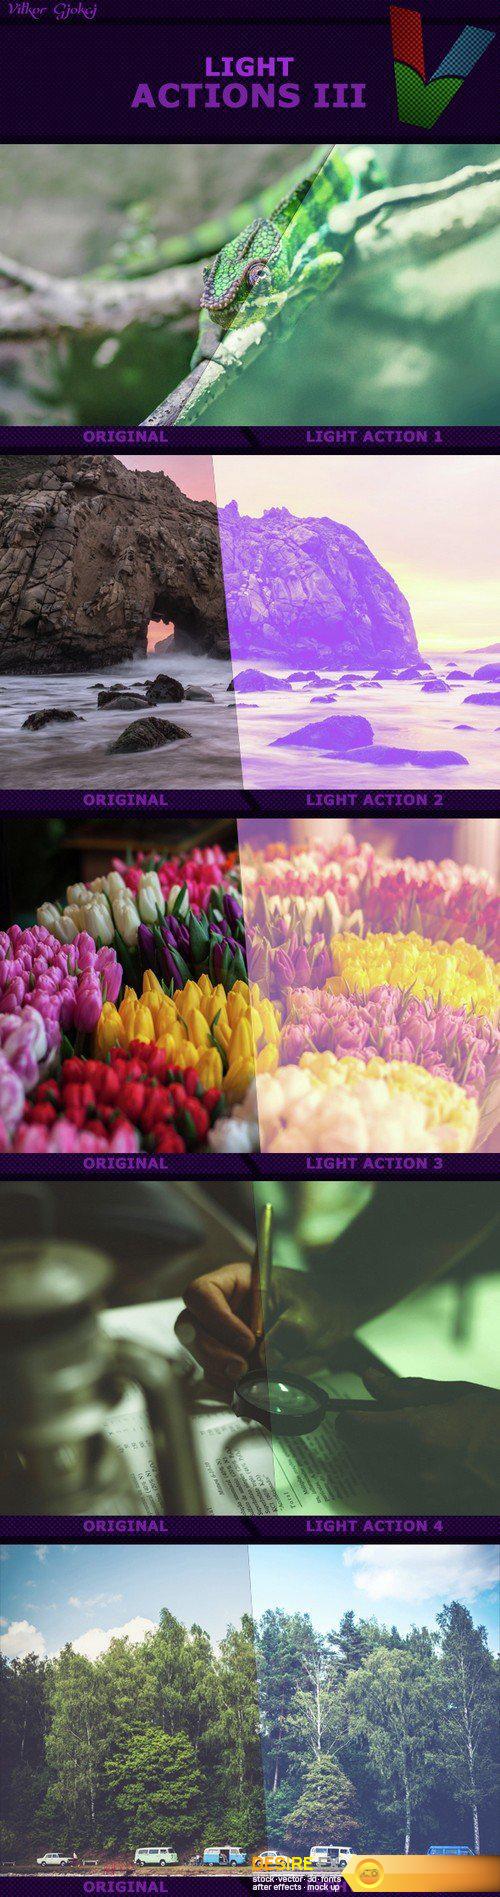 Graphicriver - Light Actions III 15297338